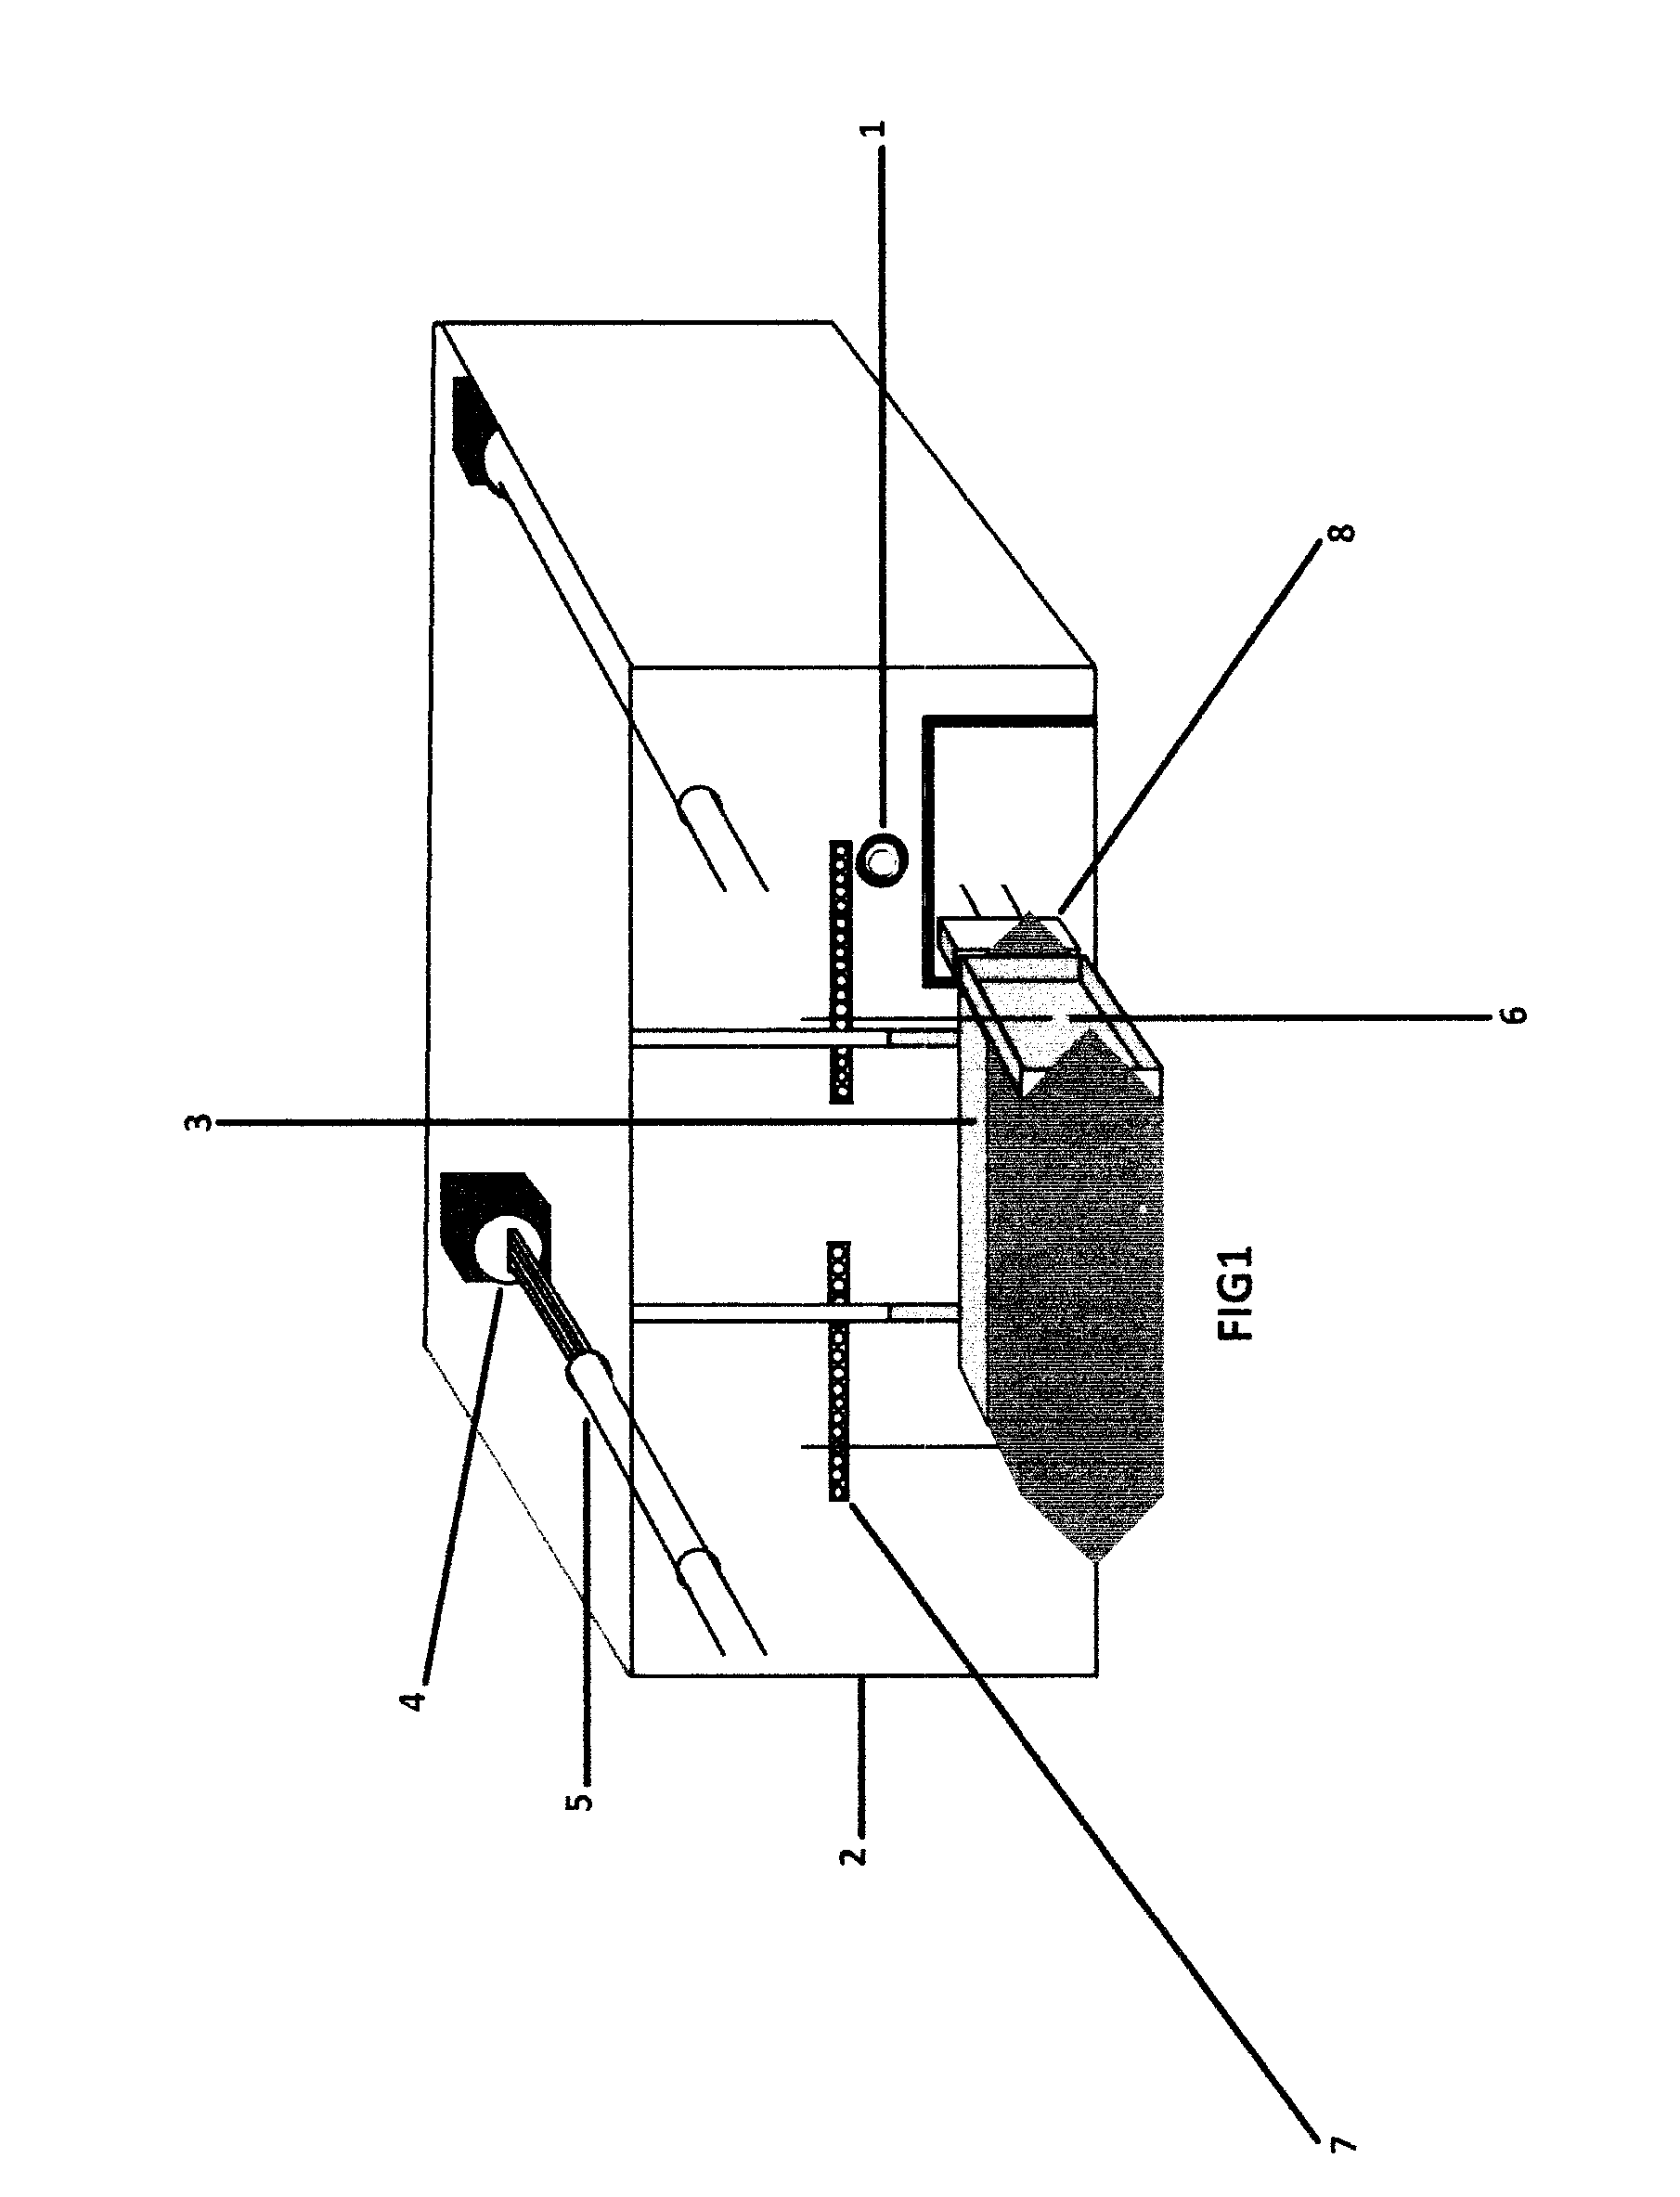 Method and Machines for Transforming Initial Sealed Packagings into Irregular Cubic or Polyhedral Packagings by Means of Sealing and Cutting Flaps